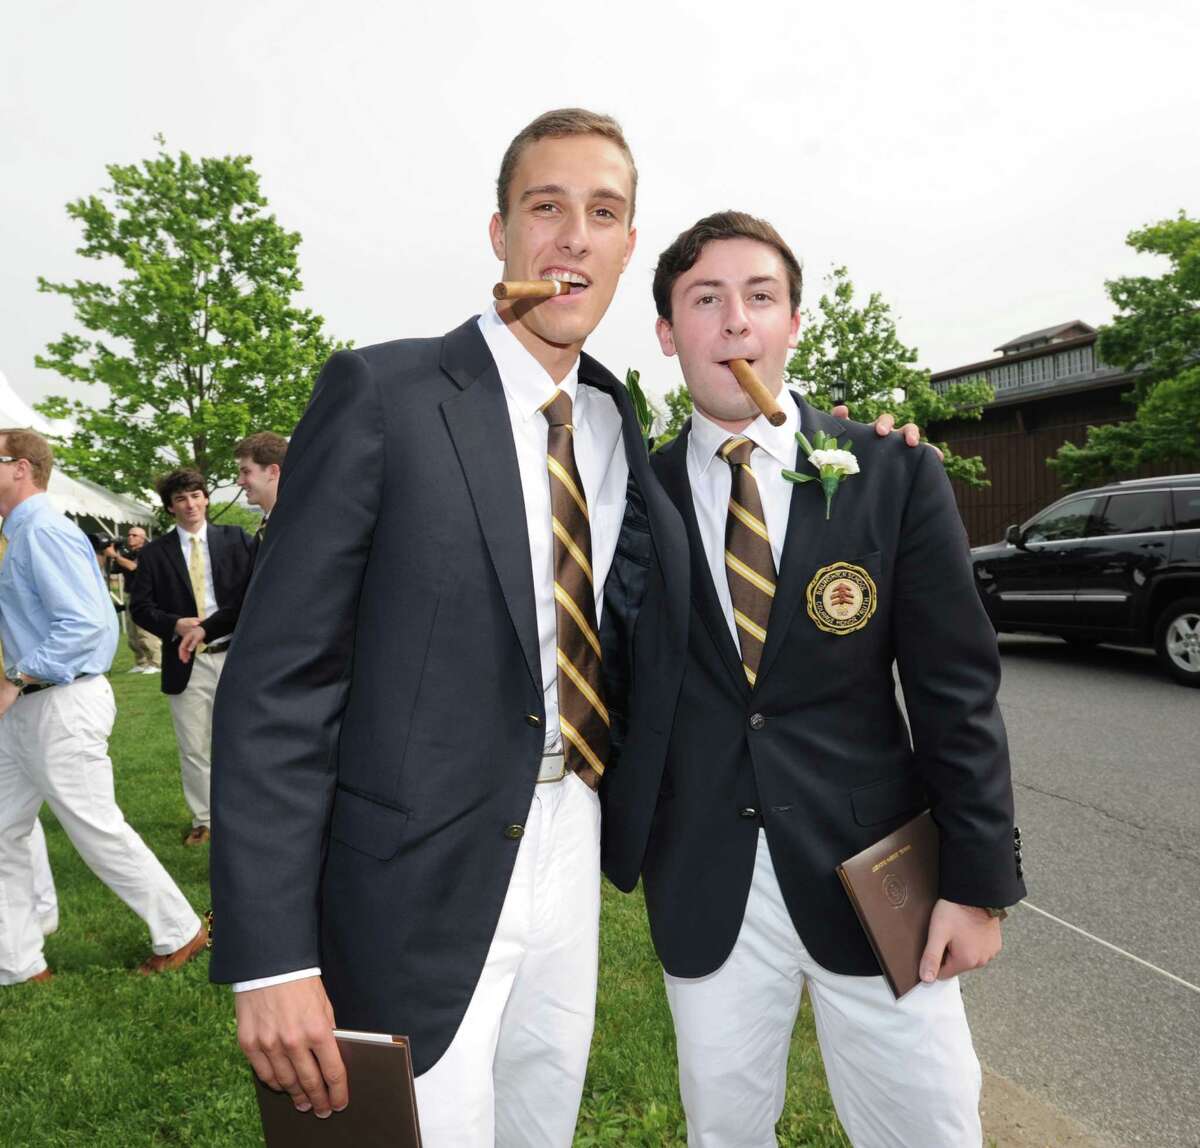 Brunswick School graduating seniors, Will Floersheimer, left, and Sam Zuckert, both 18 and both Greenwich residents, with their Brunswick School diplomas and unlighted cigars after the Brunswick School Graduation at the school in Greenwich, Wednesday, May 22, 2013.